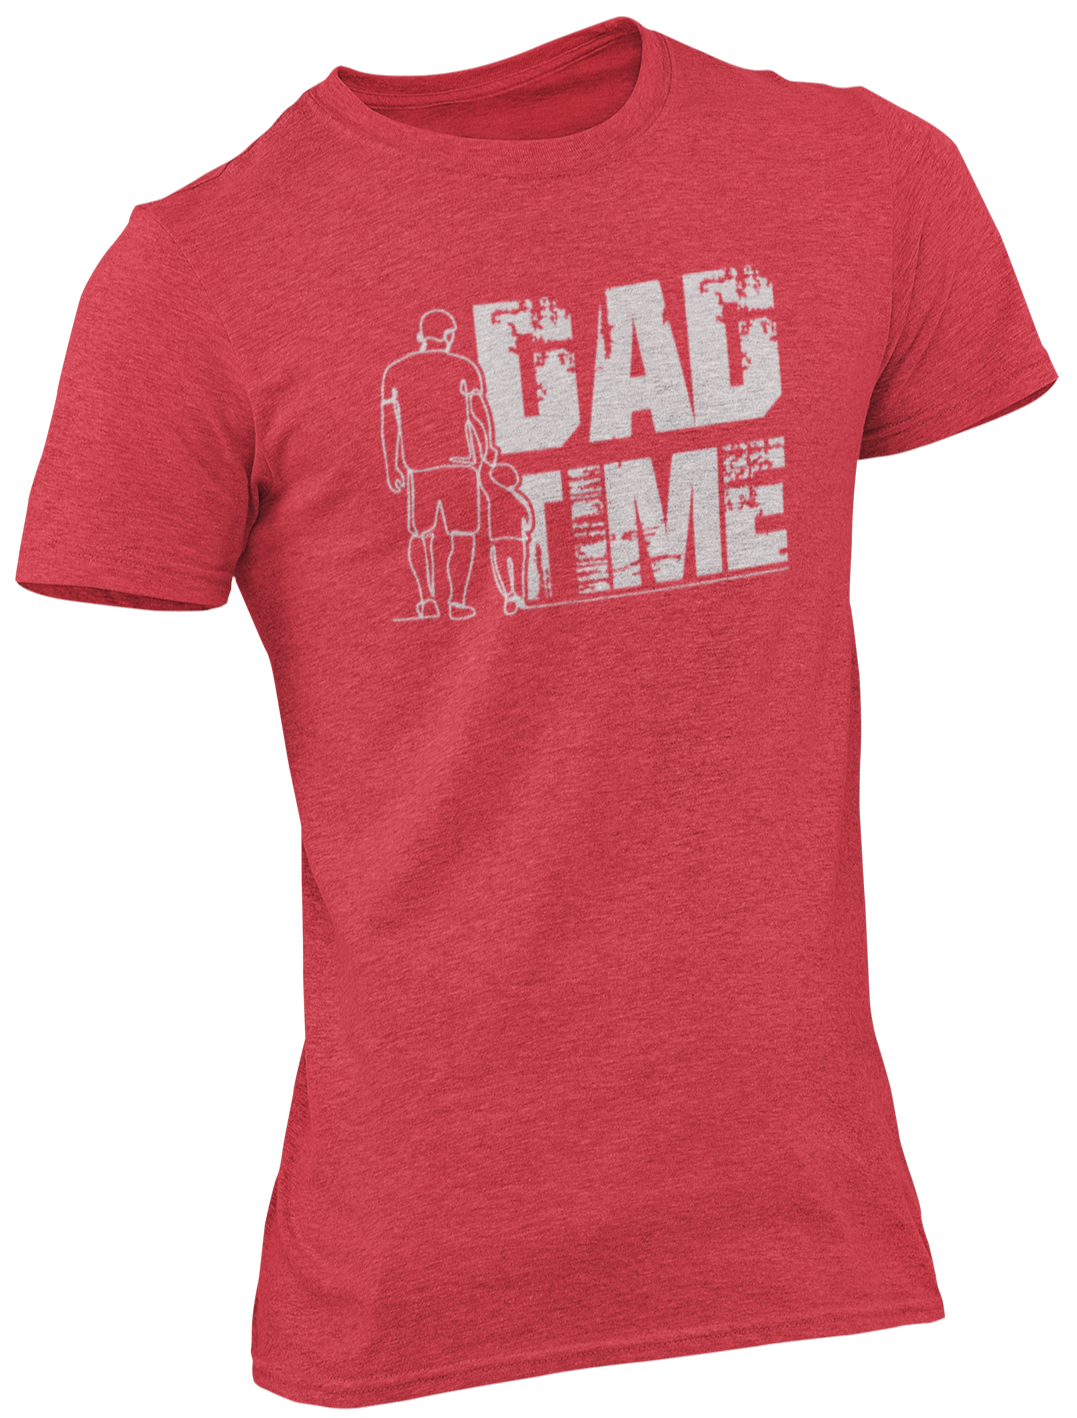 Dad Time Tee - DT220